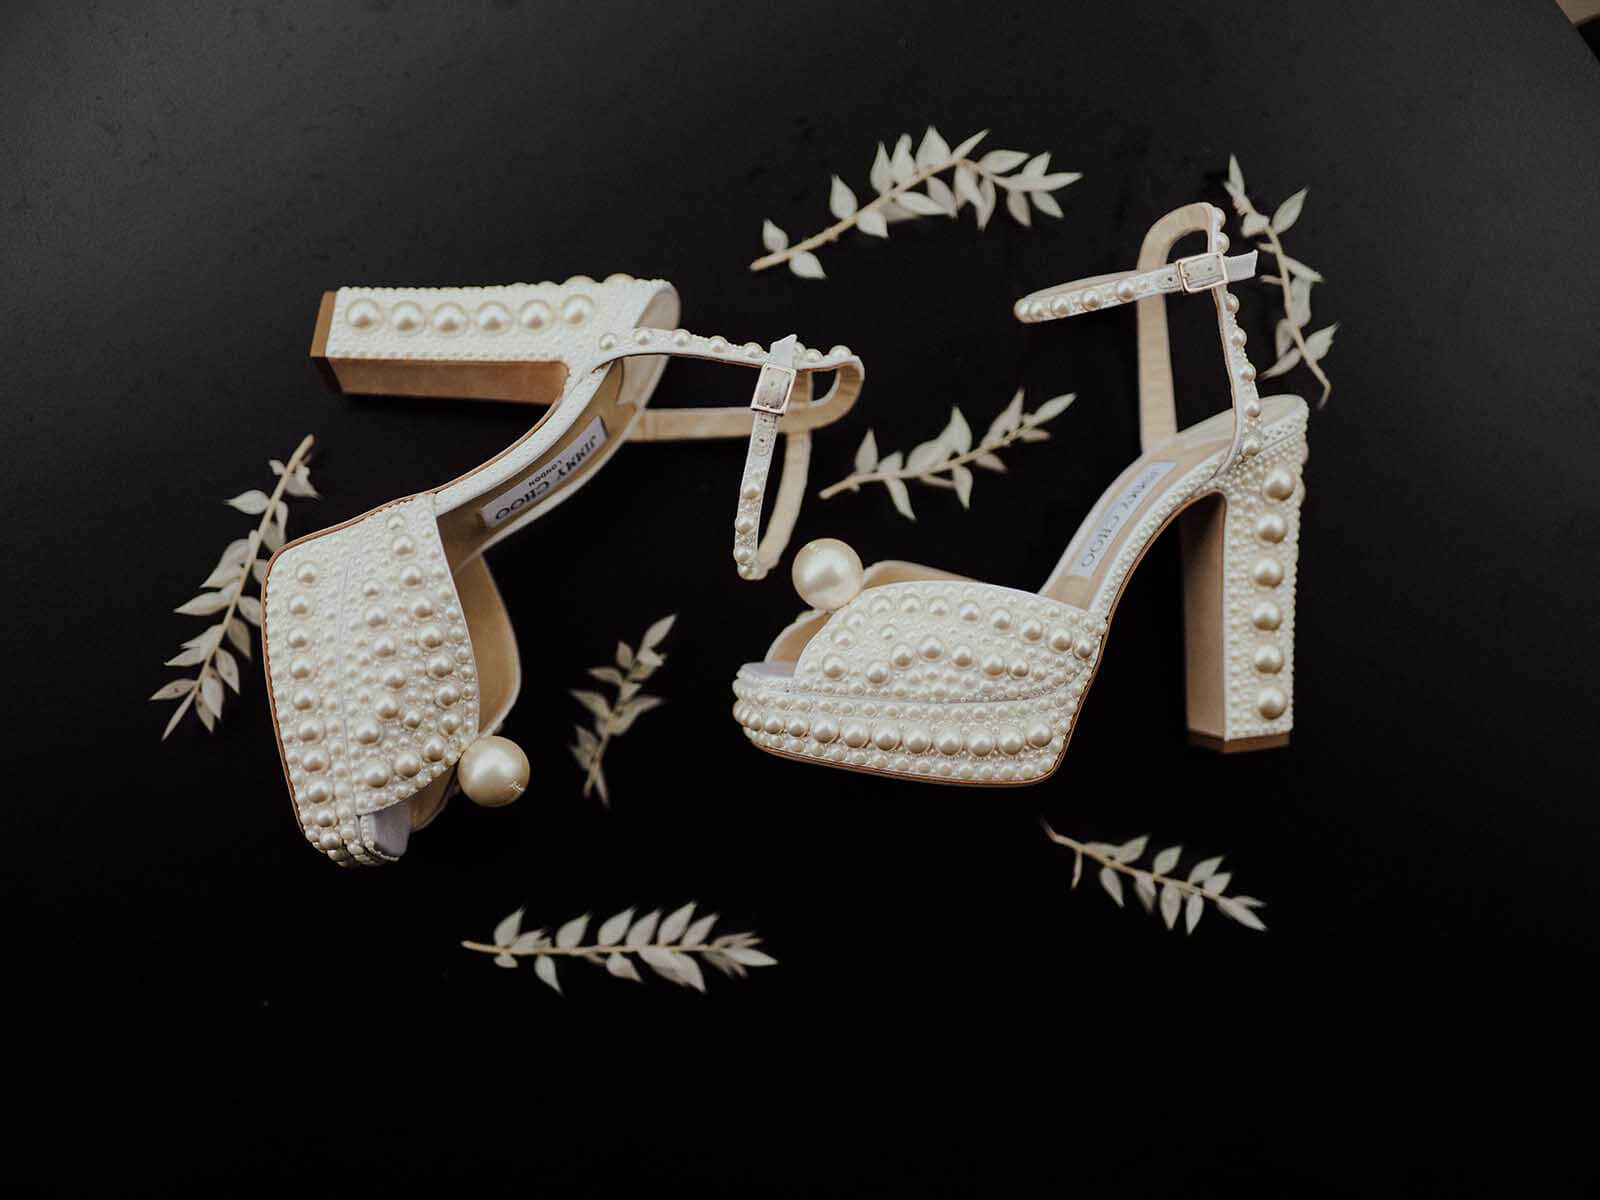 A pair of white high heeled wedding shoes on a black background.